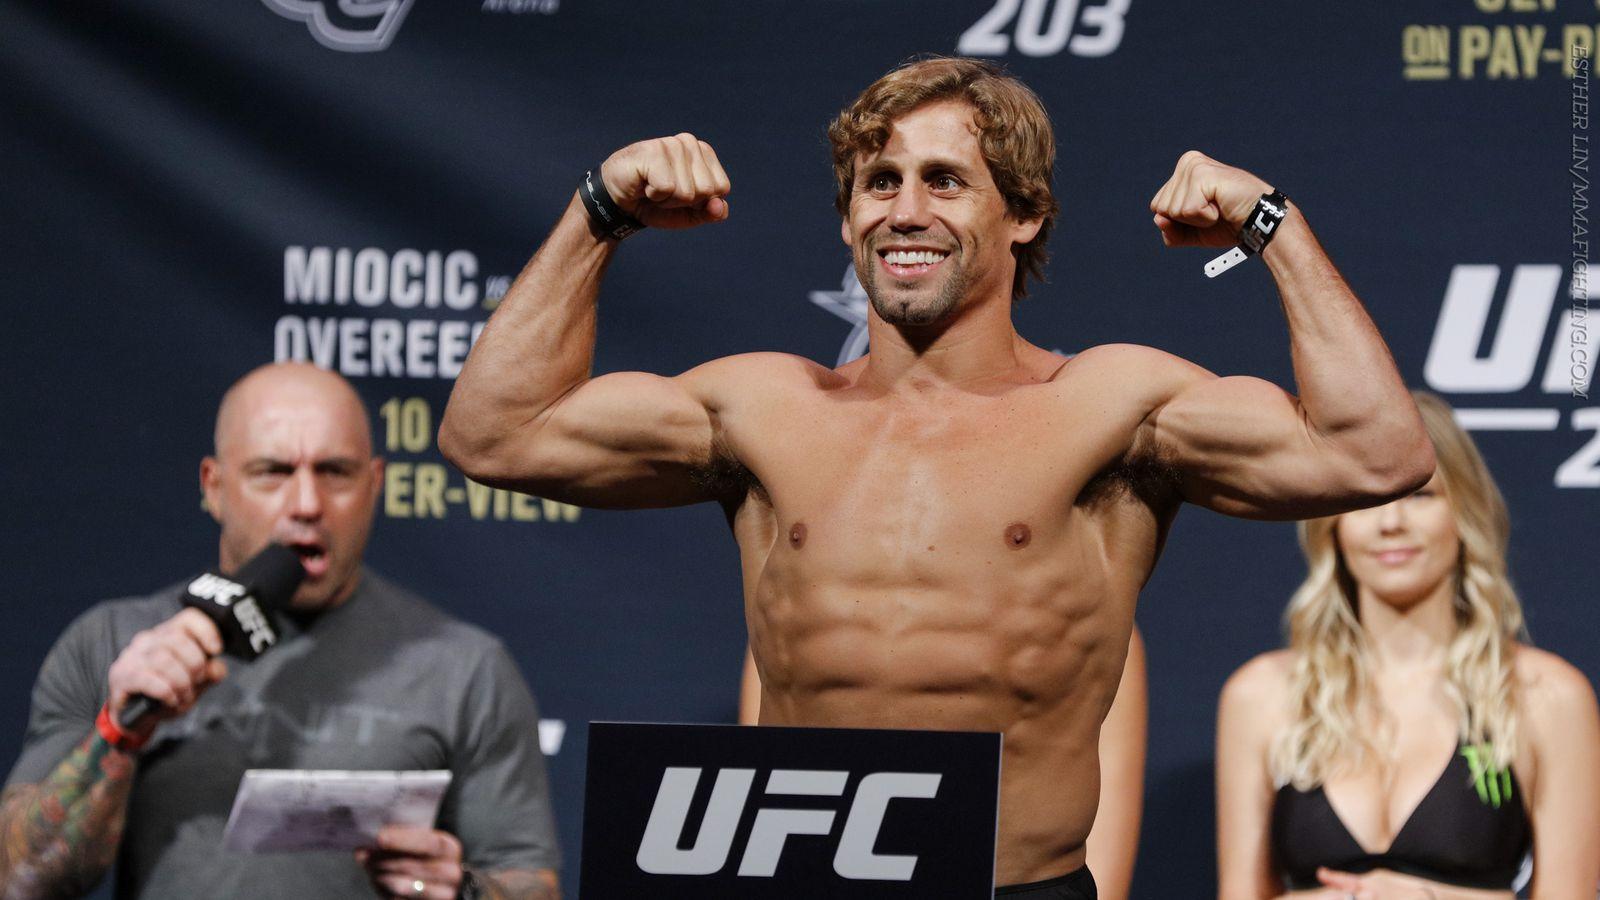 Urijah Faber announces he will retire after UFC on FOX 22 fight